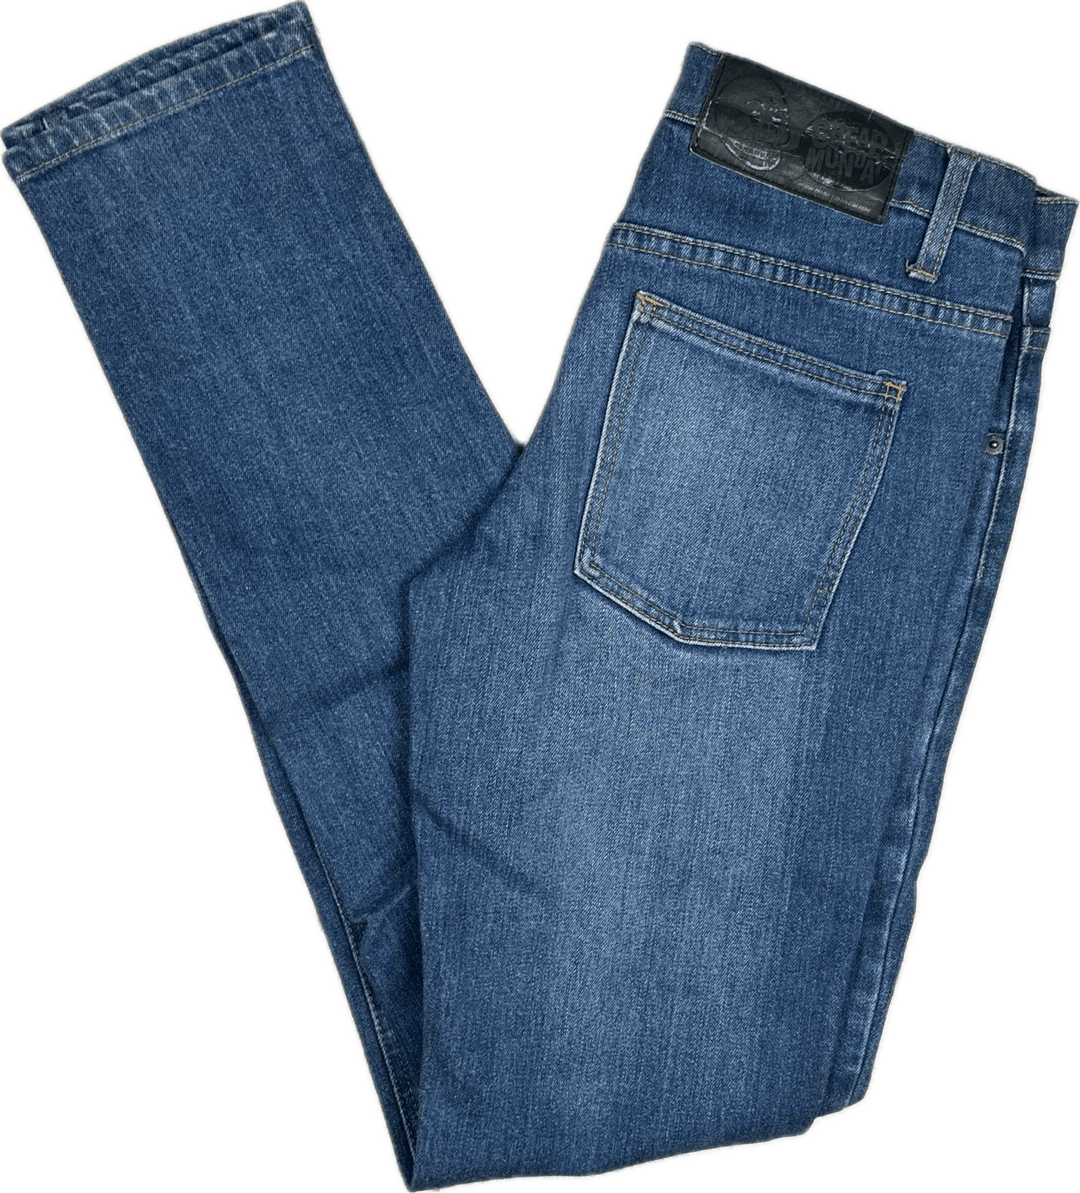 Cheap Monday 'Zip Low' in USA Blue Slim fit Jeans - Size 30//34 - Jean Pool